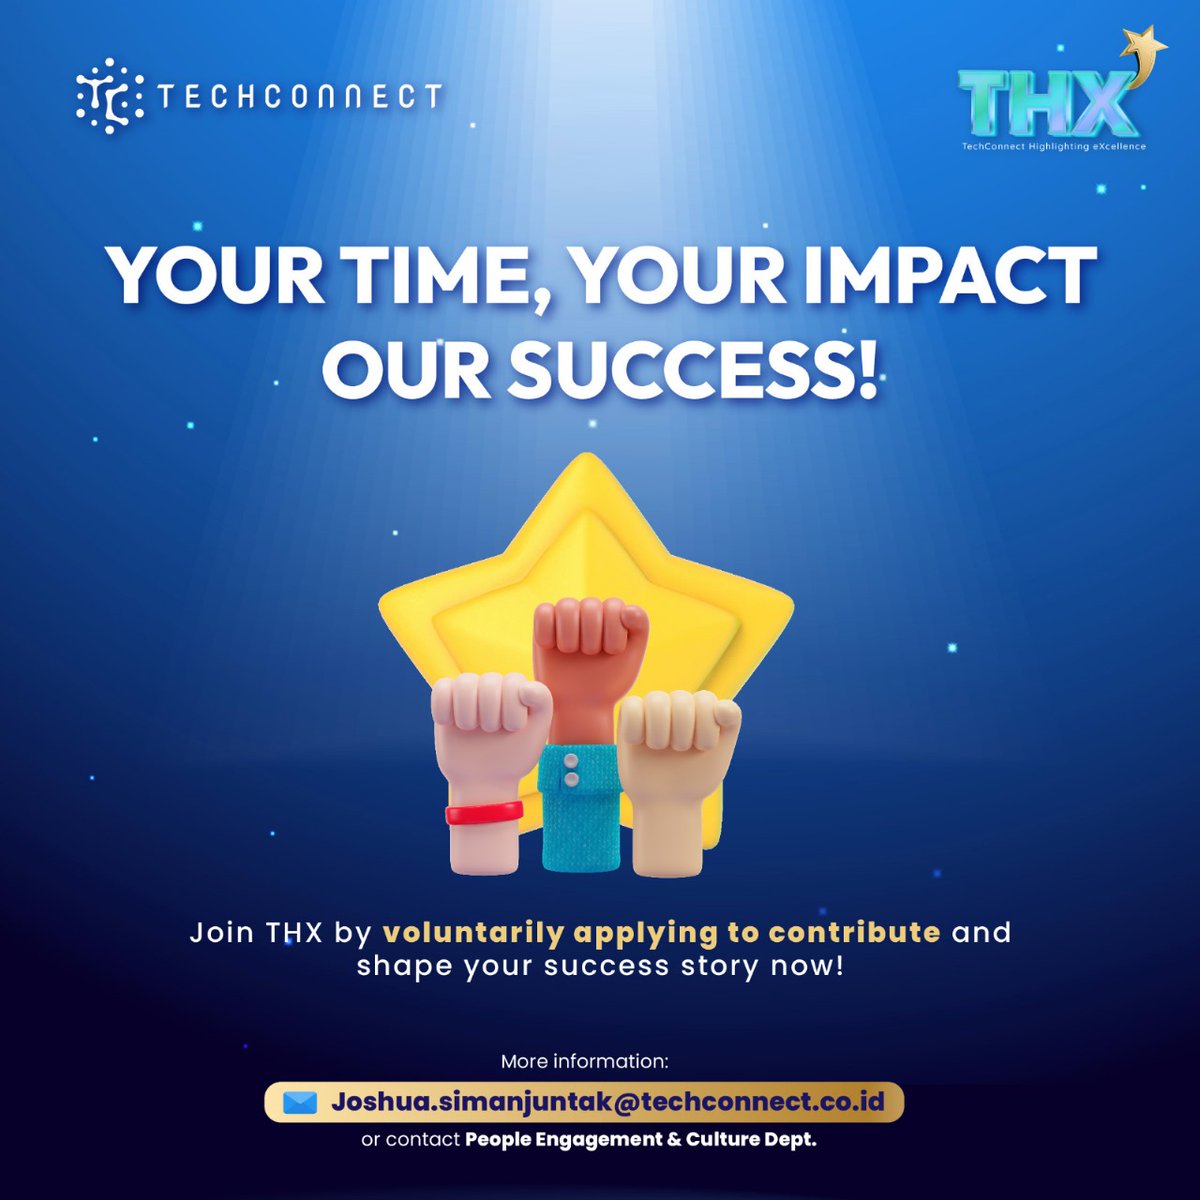 [Exclusive for Our Employees]

By taking initiative to voluntarily apply for contributions, you will get the chance to gain special recognitions for what you do at the workplace!

#TechConnect #THX #employeesonly #rewardsprogram #employeerewards